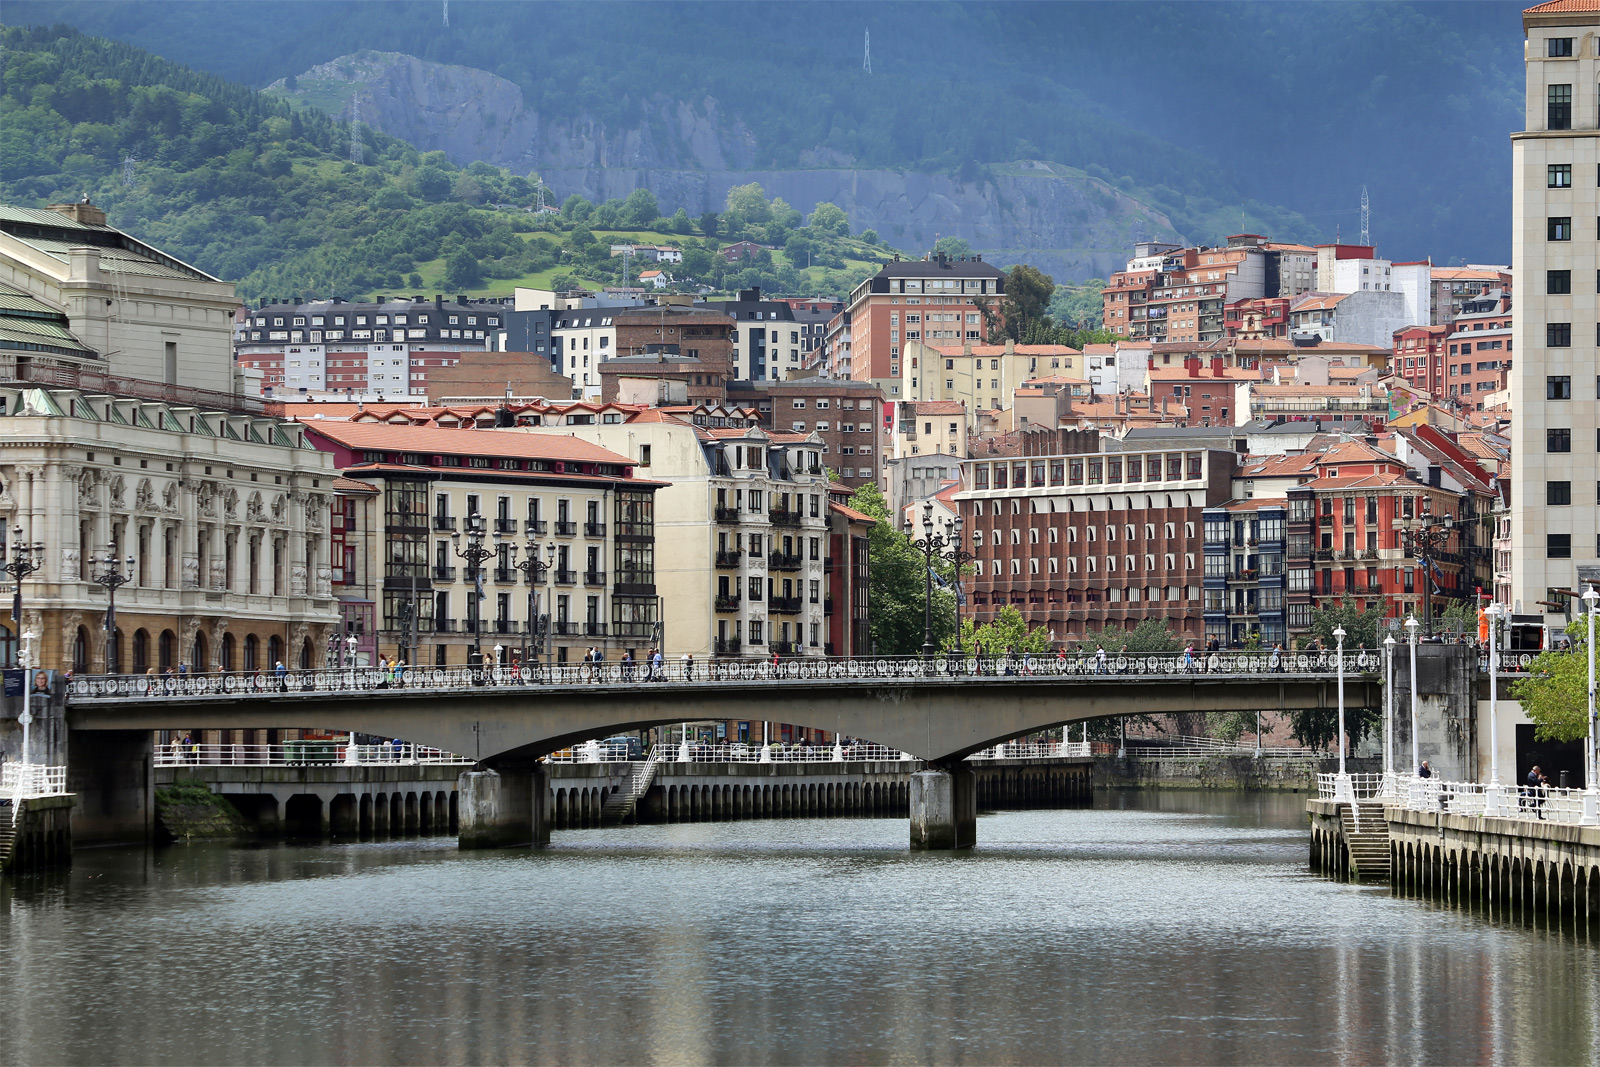 What to do in Bilbao in 2 or 3 days?